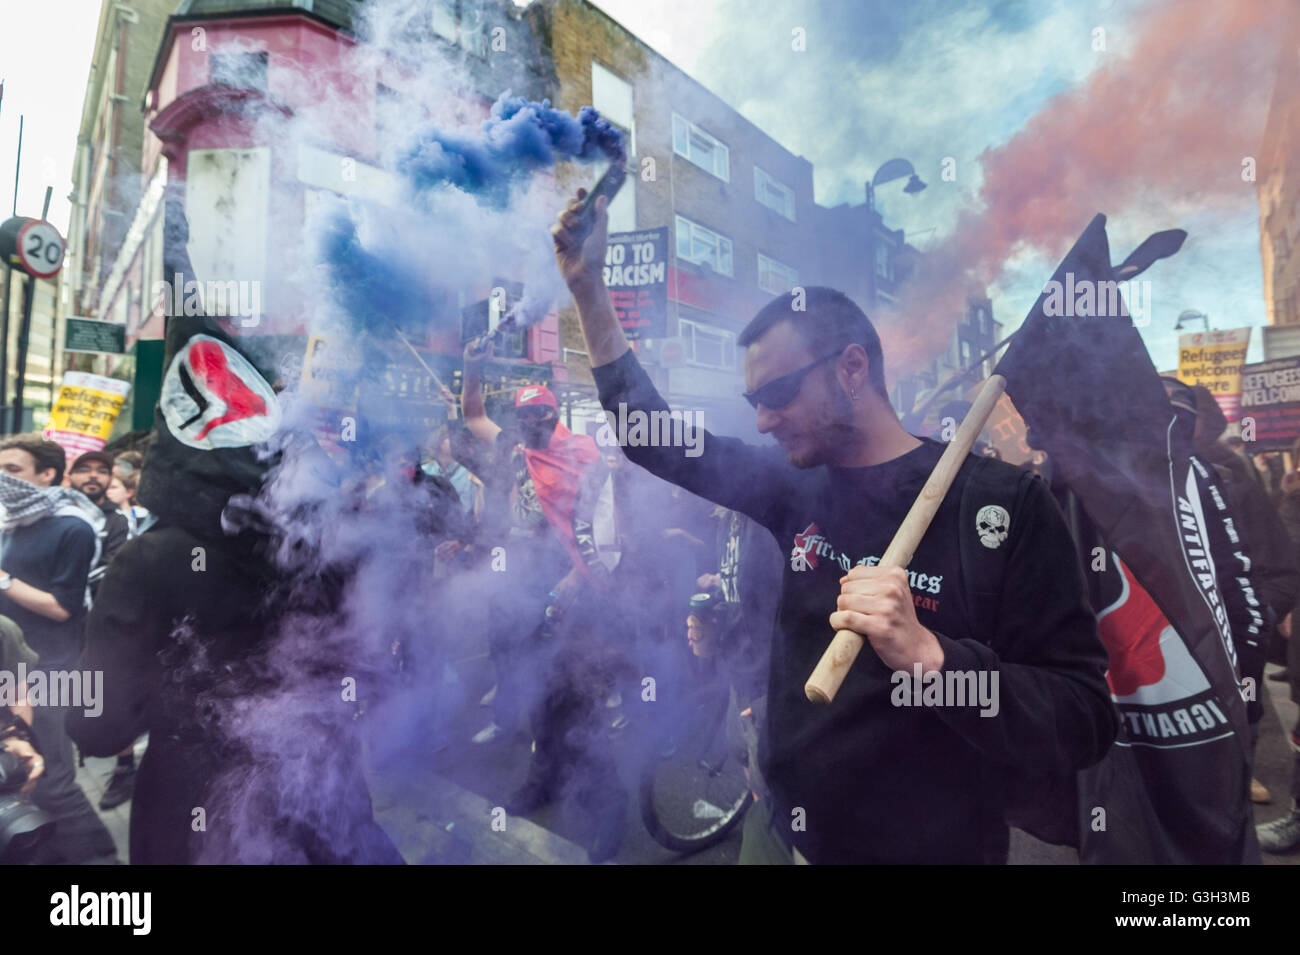 London, UK. June 24th 2016. Flares are set off on the long march from Altab Ali Park to the offices of News International on the day after the UK voted to leave the EU. They were protesting against racism, for migrant rights and against fascist violence and argue that migration and immigrants have been attacked and scapegoated not only by both Remain and Leave campaigns but by mainstream parties and media over more than 20 years, stoking up hatred by insisting immigrants are a 'problem'. Peter Marshall/Alamy Live News Stock Photo